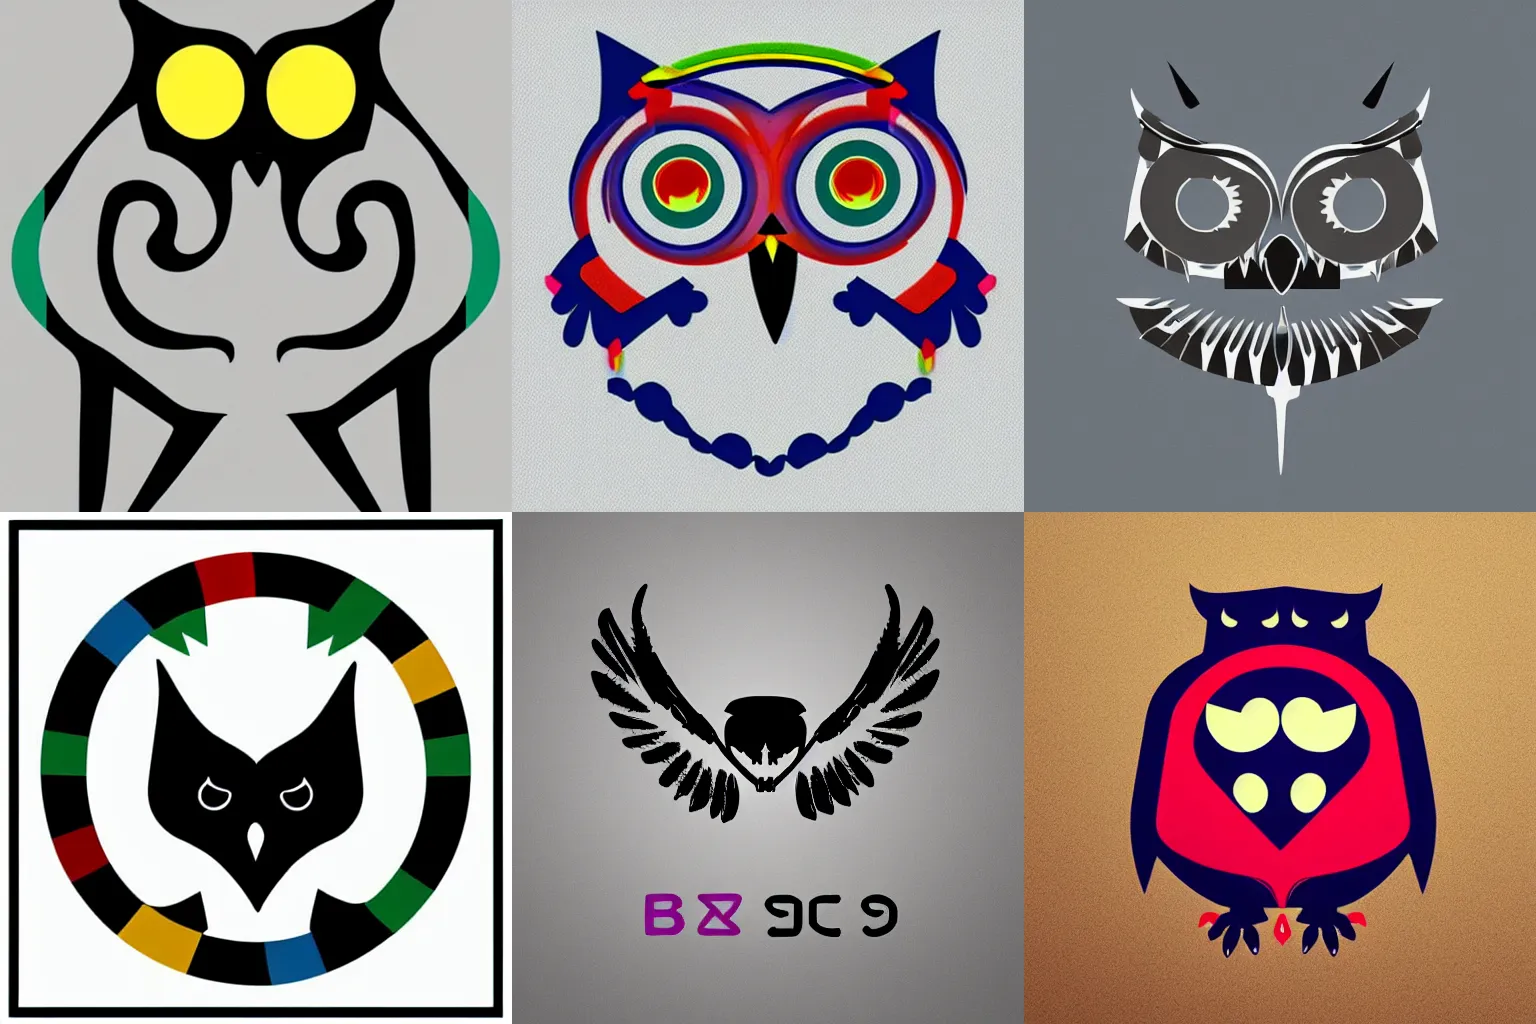 Prompt: A minimalist logo of an owl skeleton in the y2k style, bauhaus style, created by The Designers Republic, vibrant colors